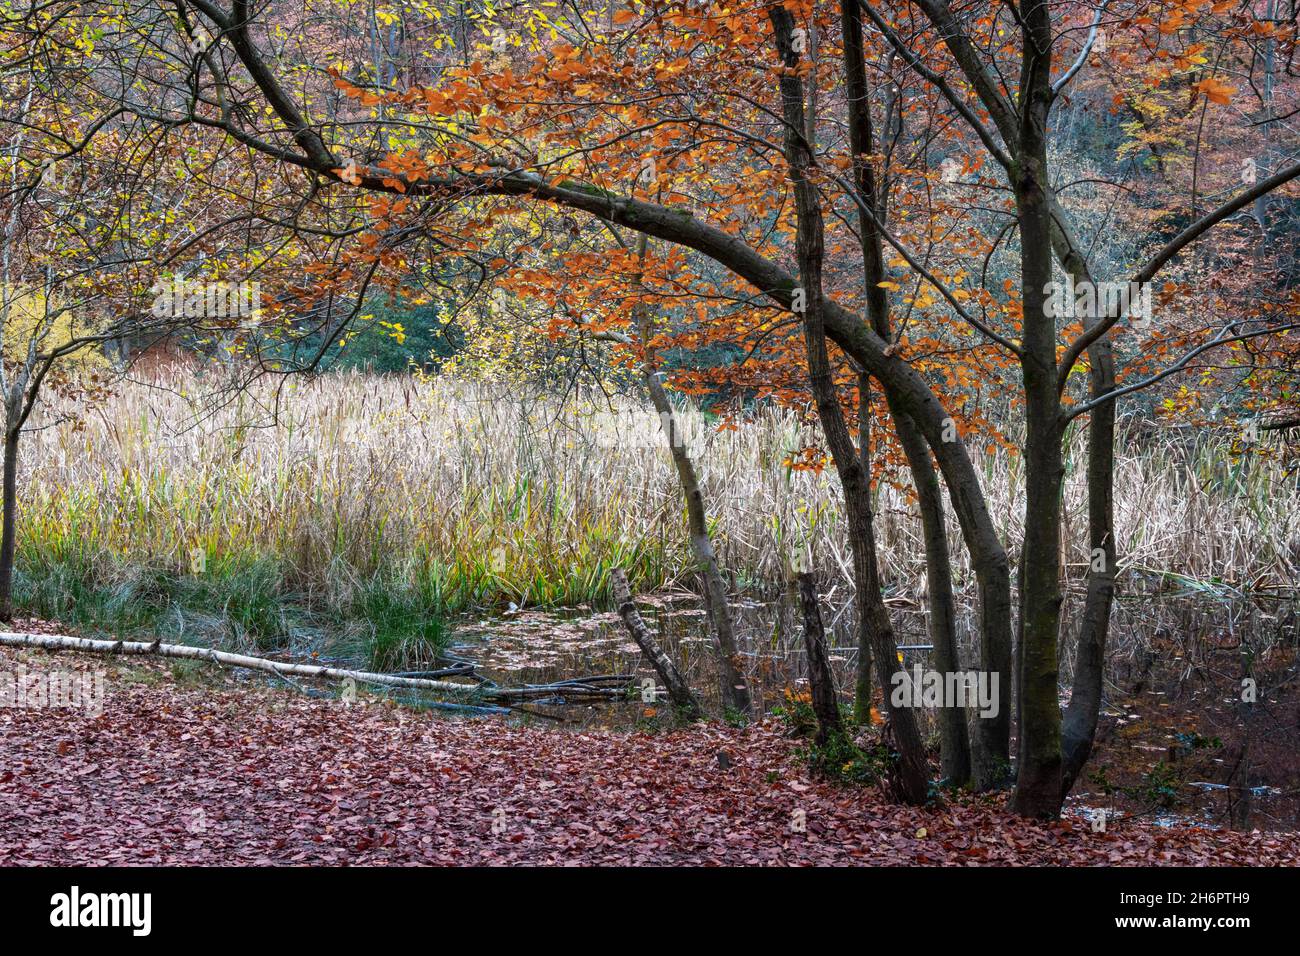 Woodland with reeds in the background. Young trees growing  on the banks of a pond which is overgrown with reeds, Burnham woods, Buckinghamshire, UK Stock Photo